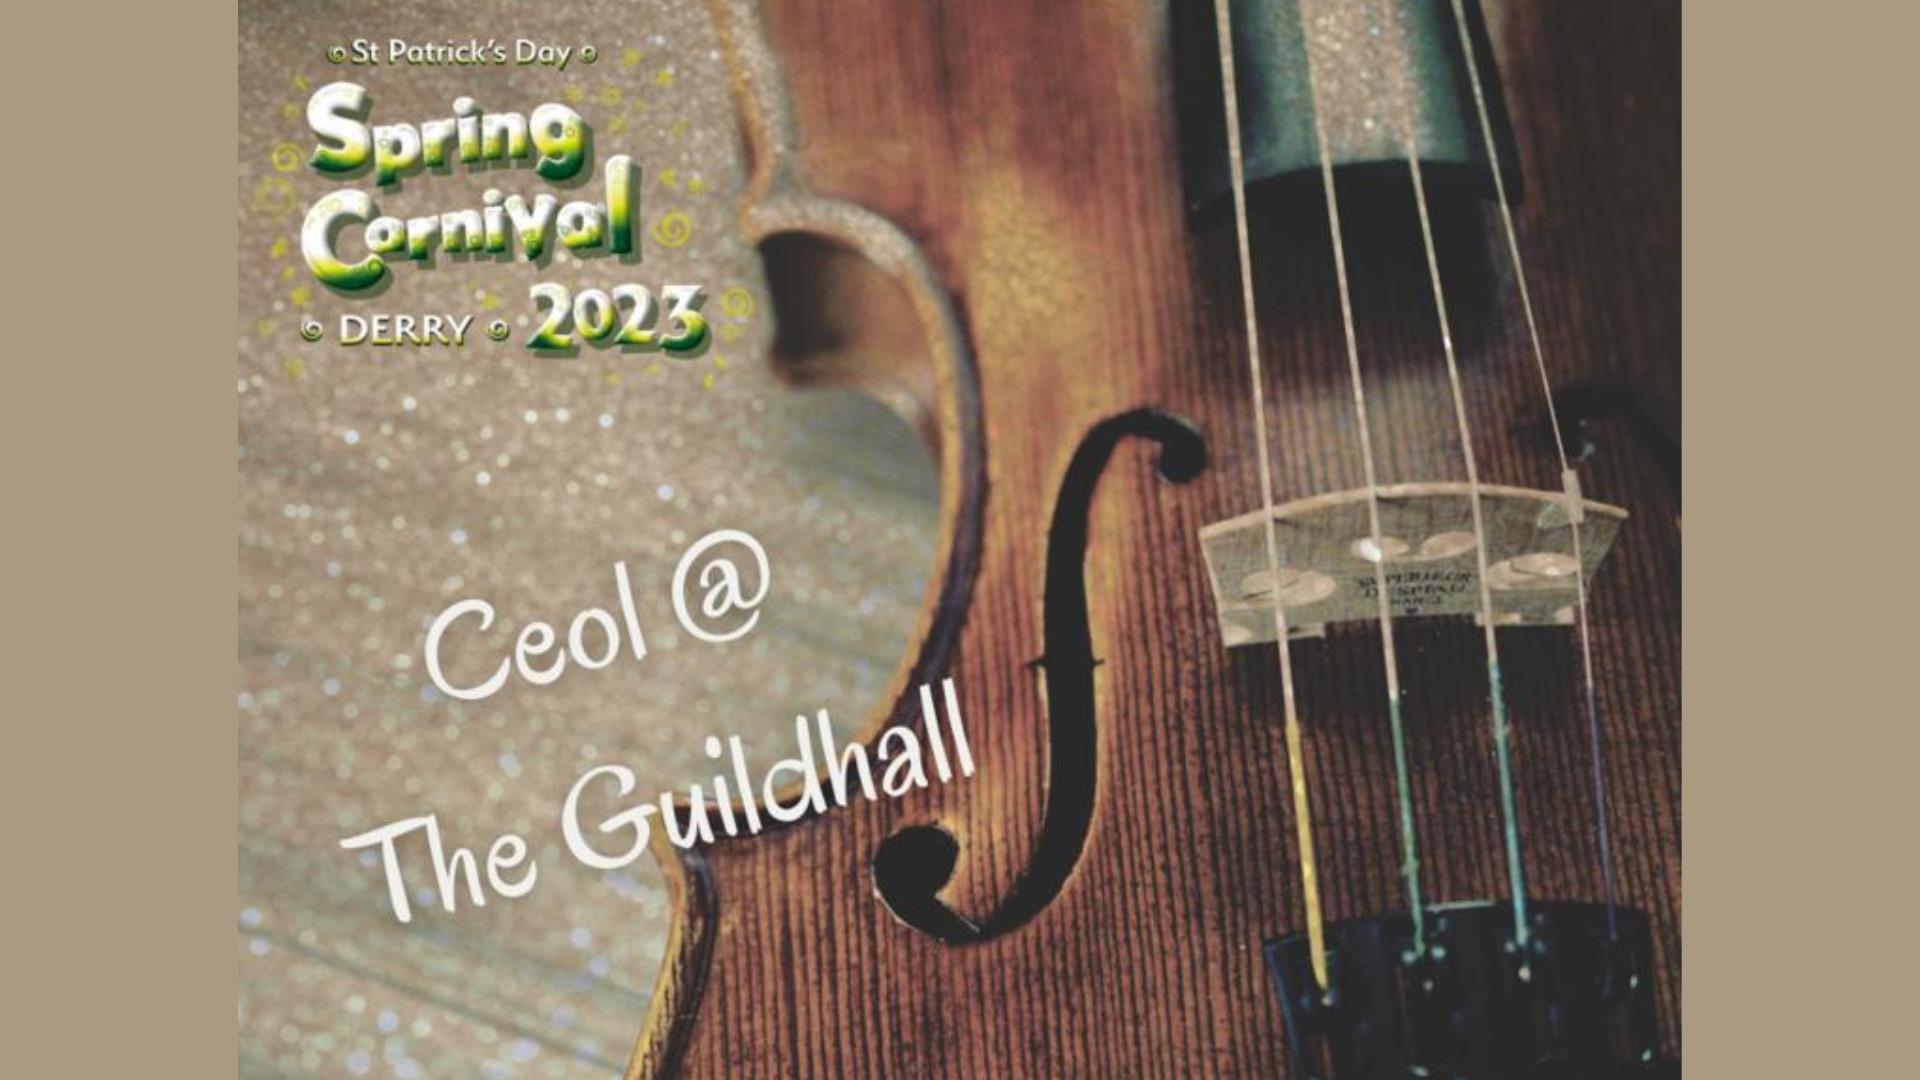 Promo image for the 'Ceol at The Guildhall' event.